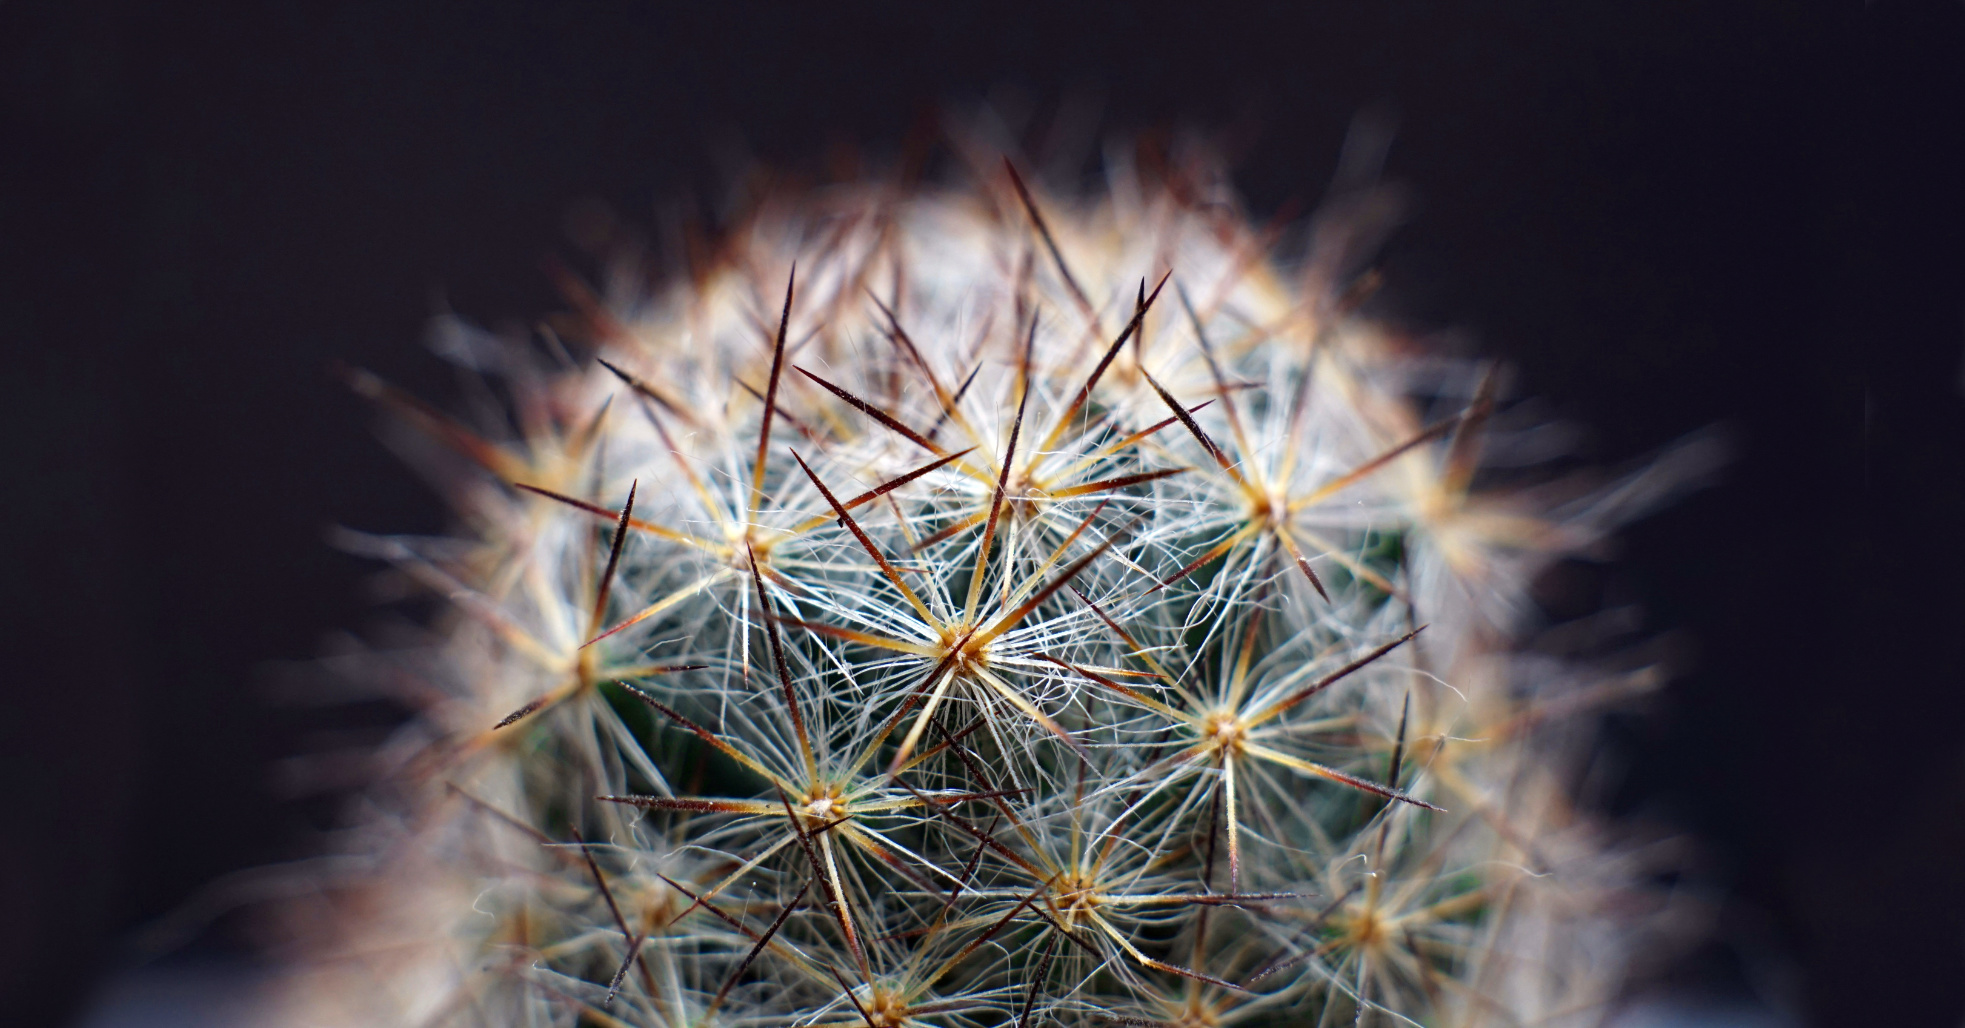 a soft-looking cactus that is actually sharp and painful to touch